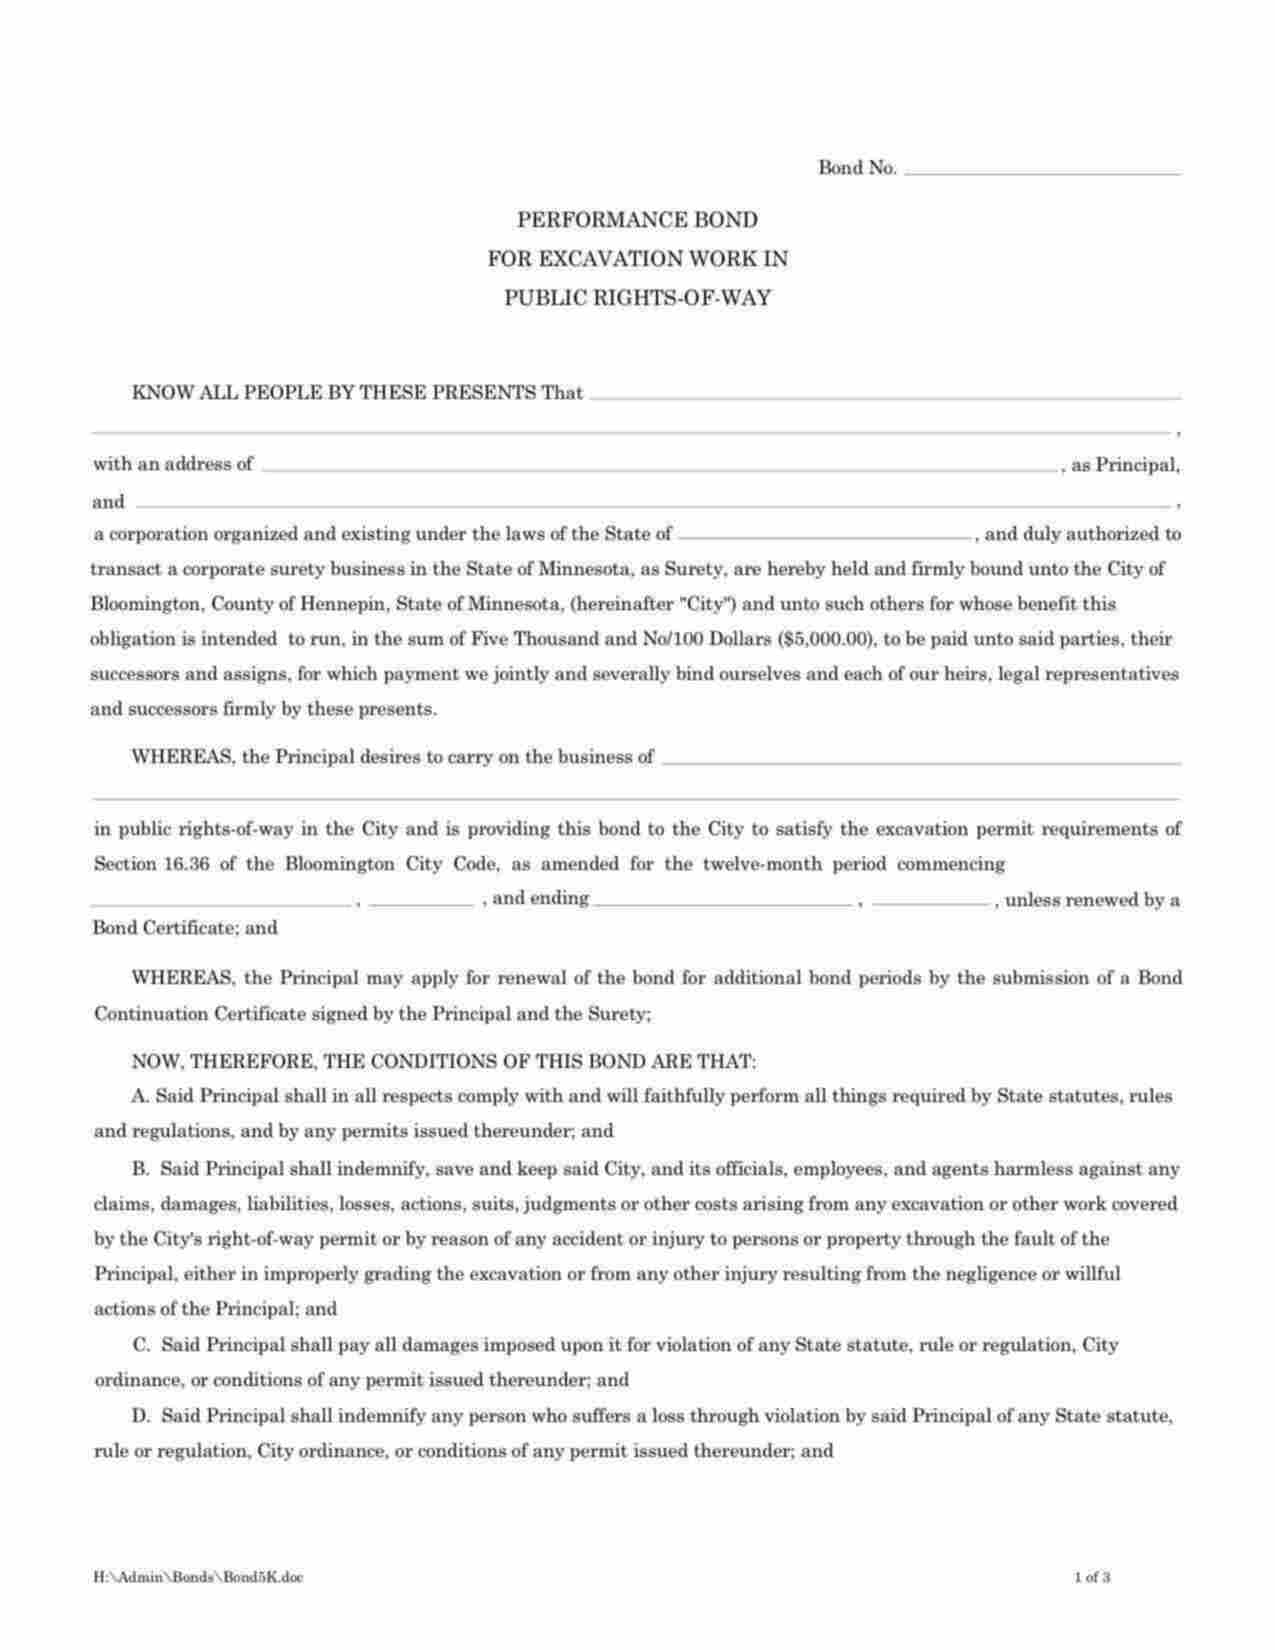 Minnesota Excavation Work in Public Rights-of-Way Bond Form